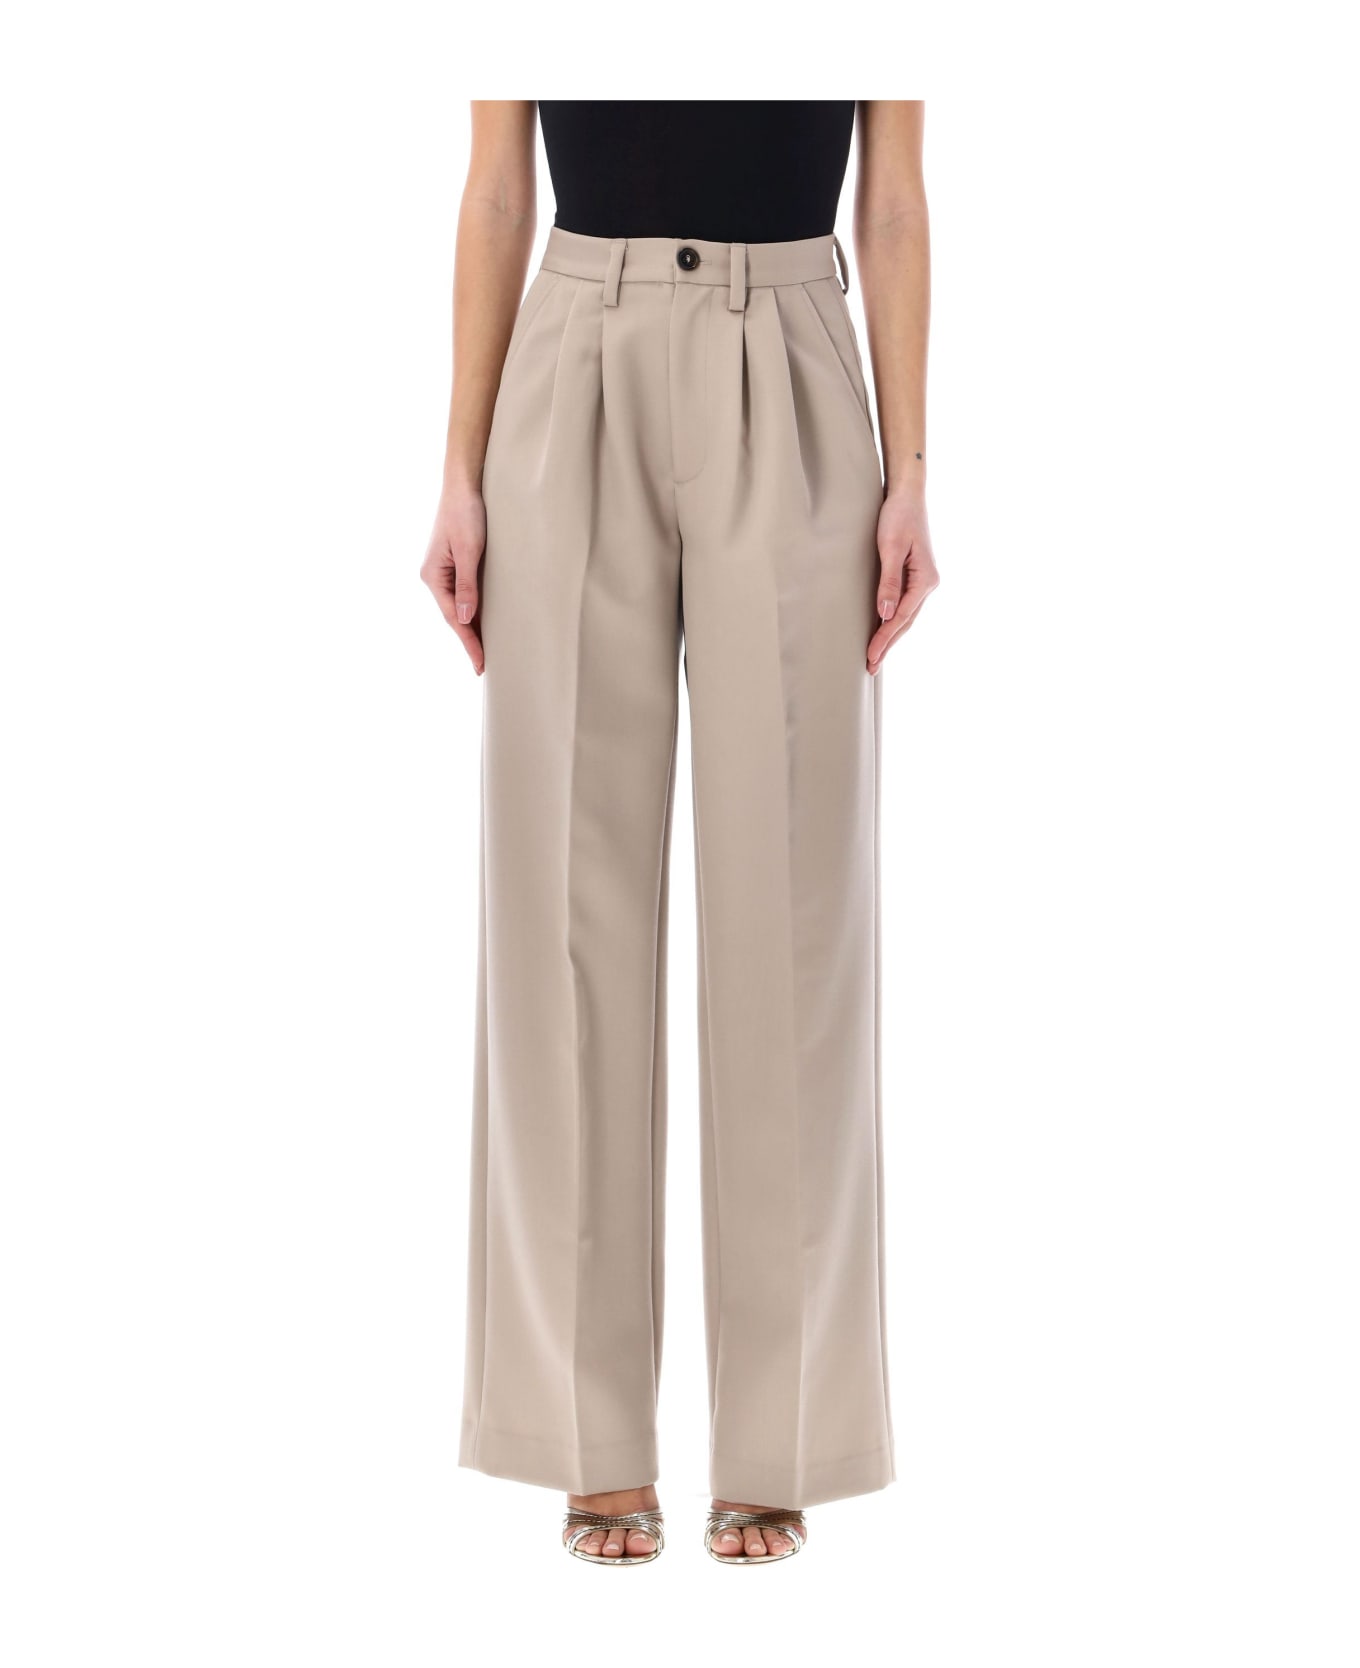 Anine Bing Carrie Pant - NEUTRALS ボトムス